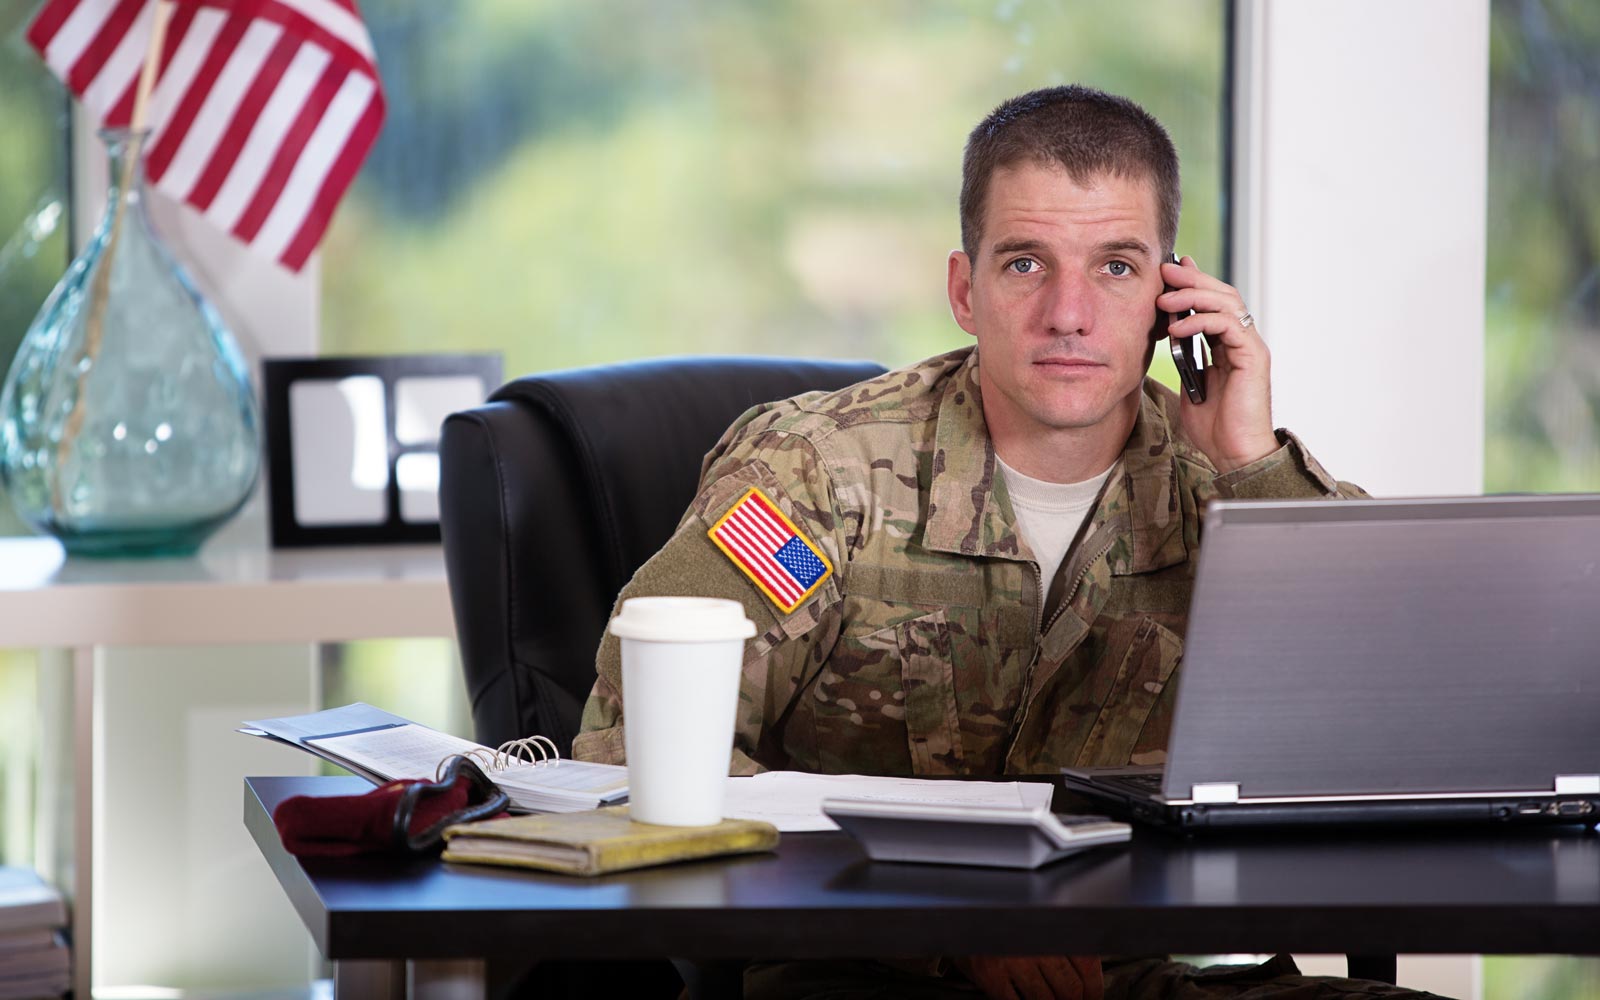 Male veteran on a phone at a work desk with an American flag in the background.